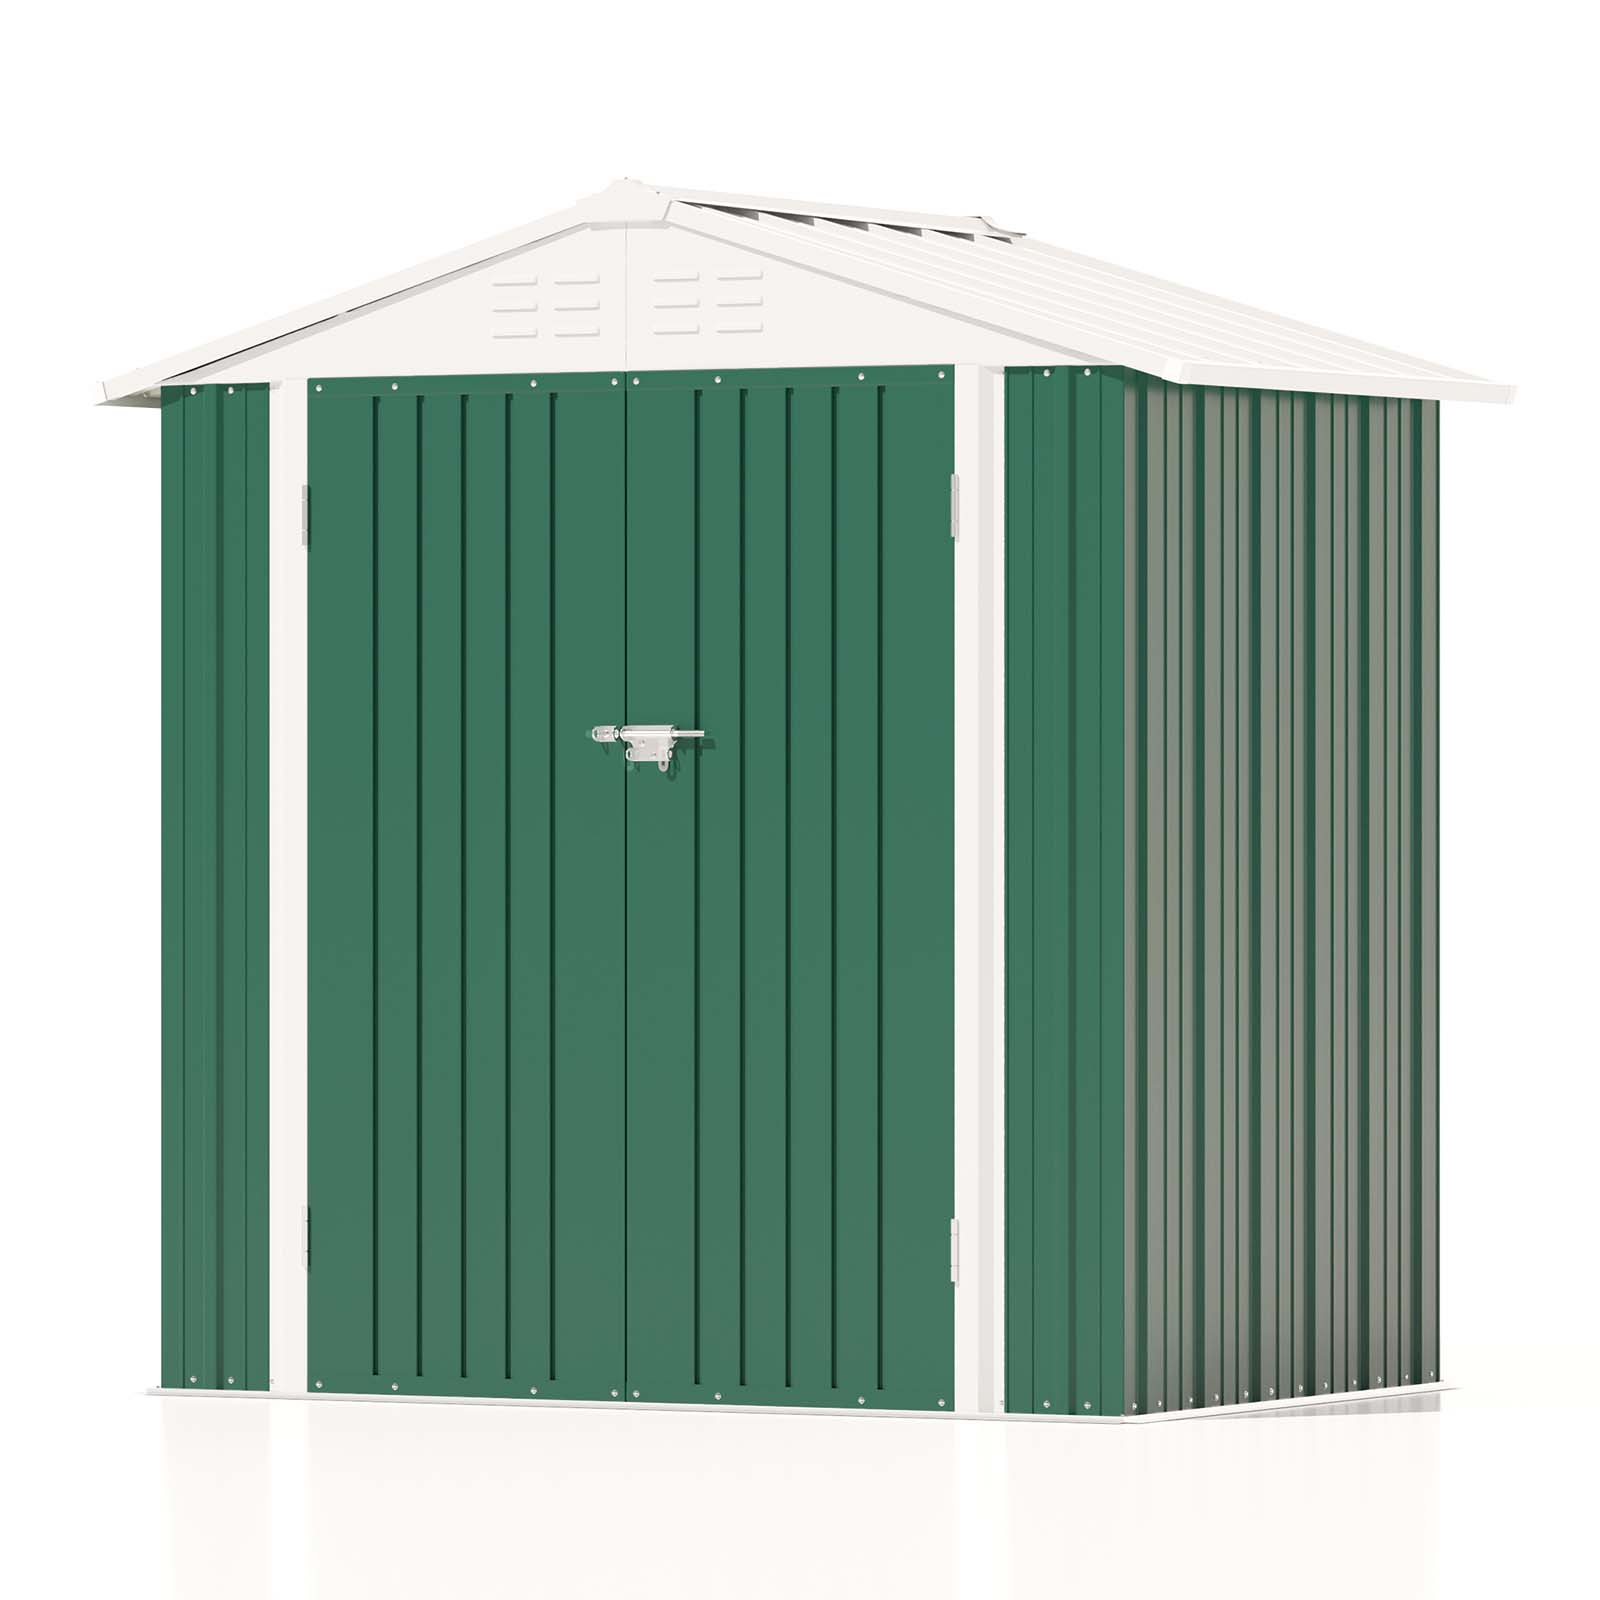 Patiowell 6x4 Metal Shed With Peak Roof-Bottle Green